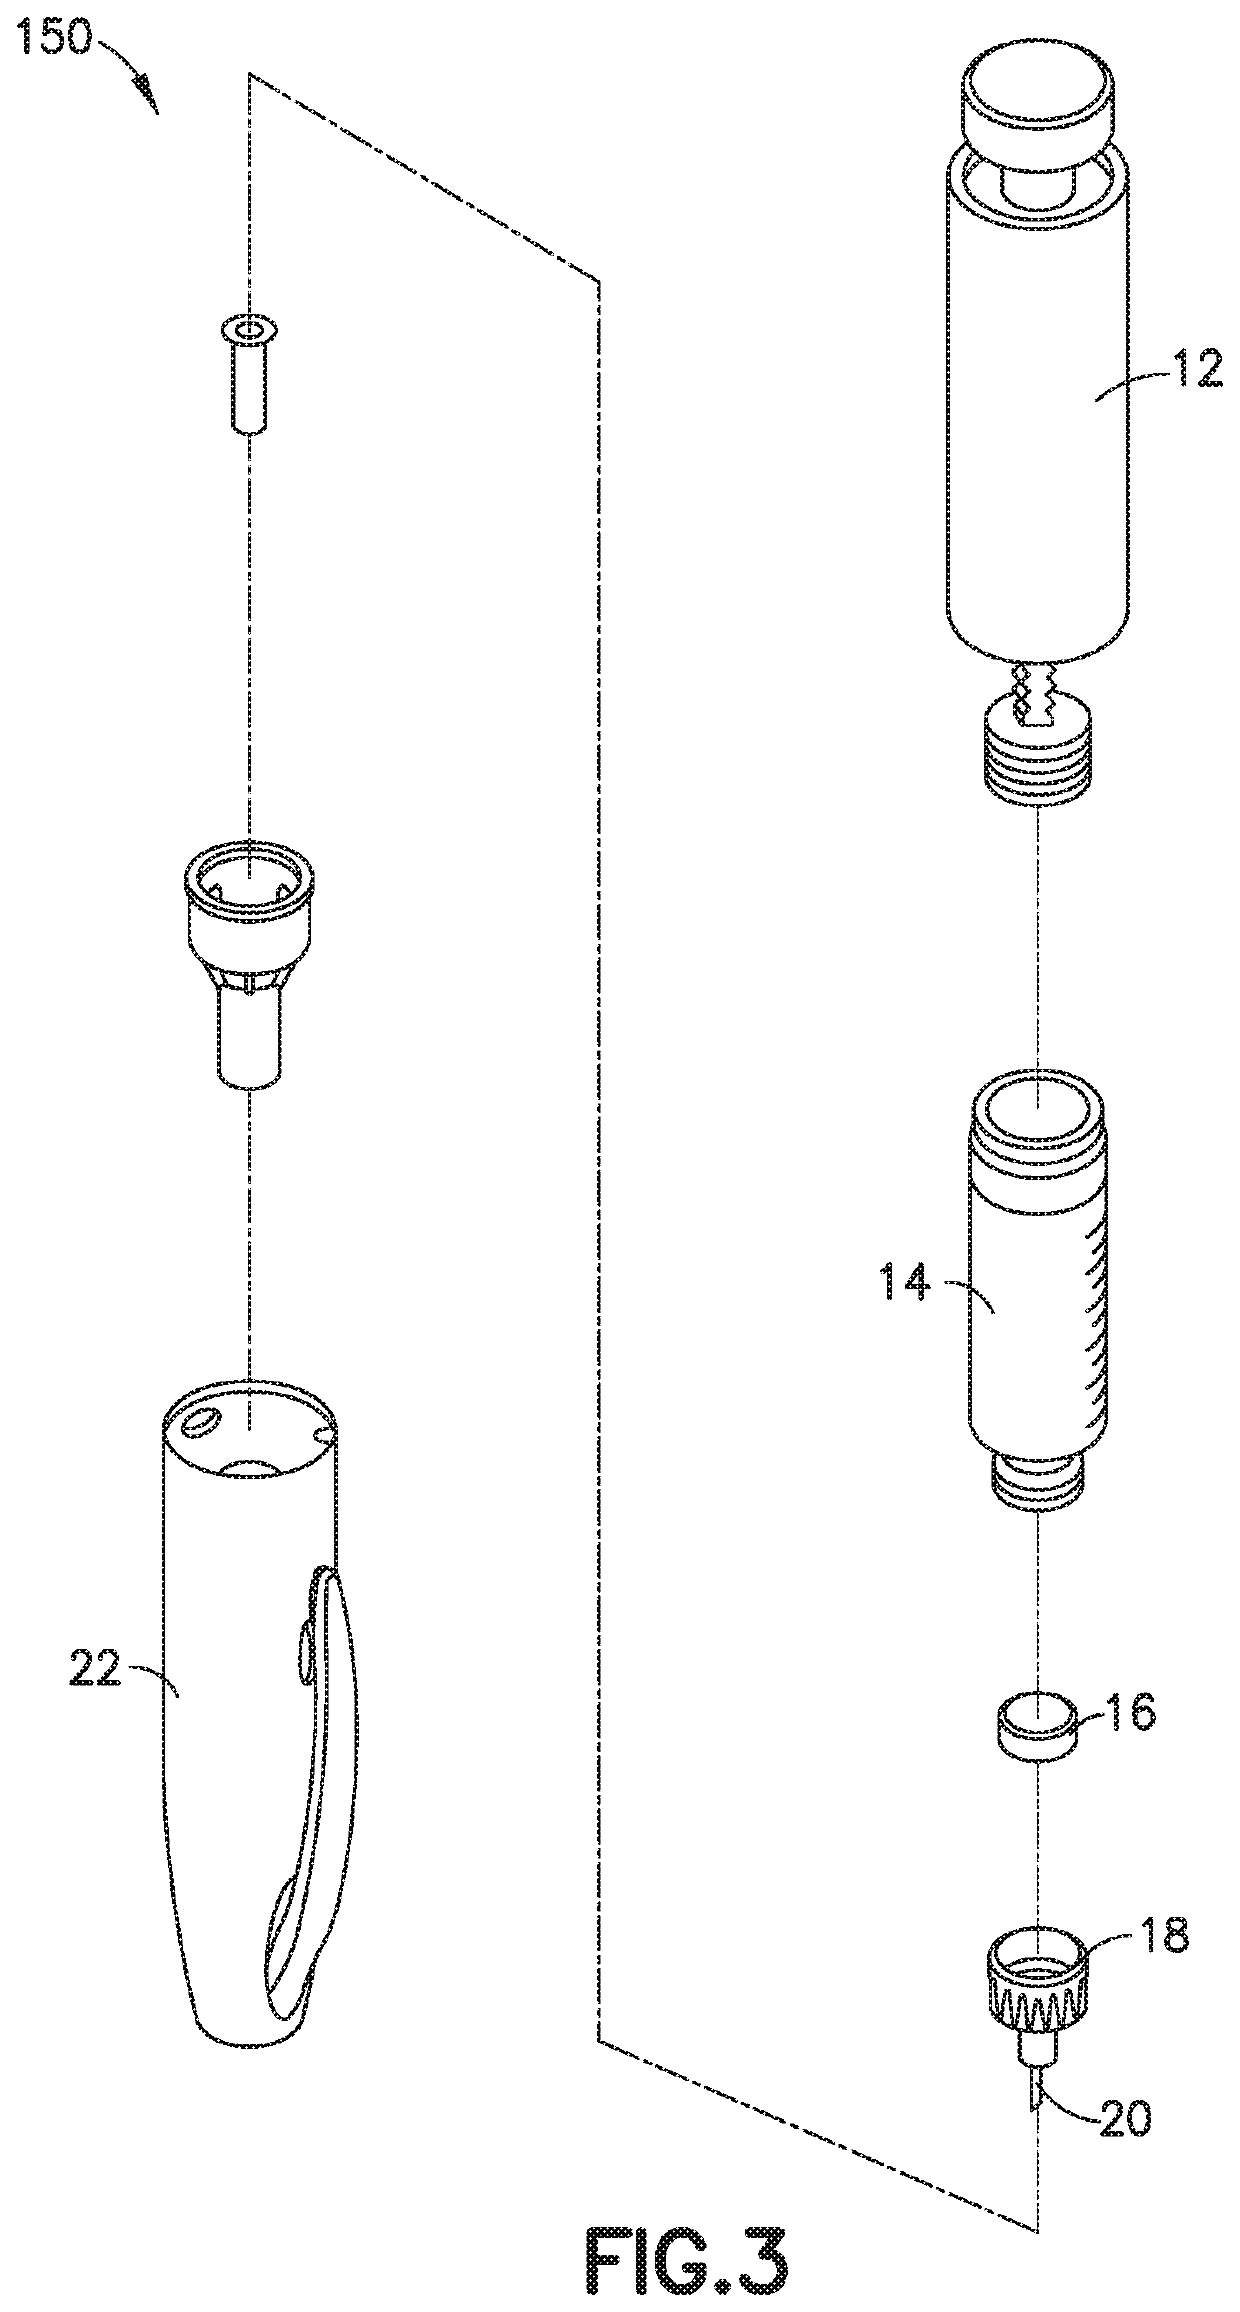 Pen needle hub with a patient contact surface